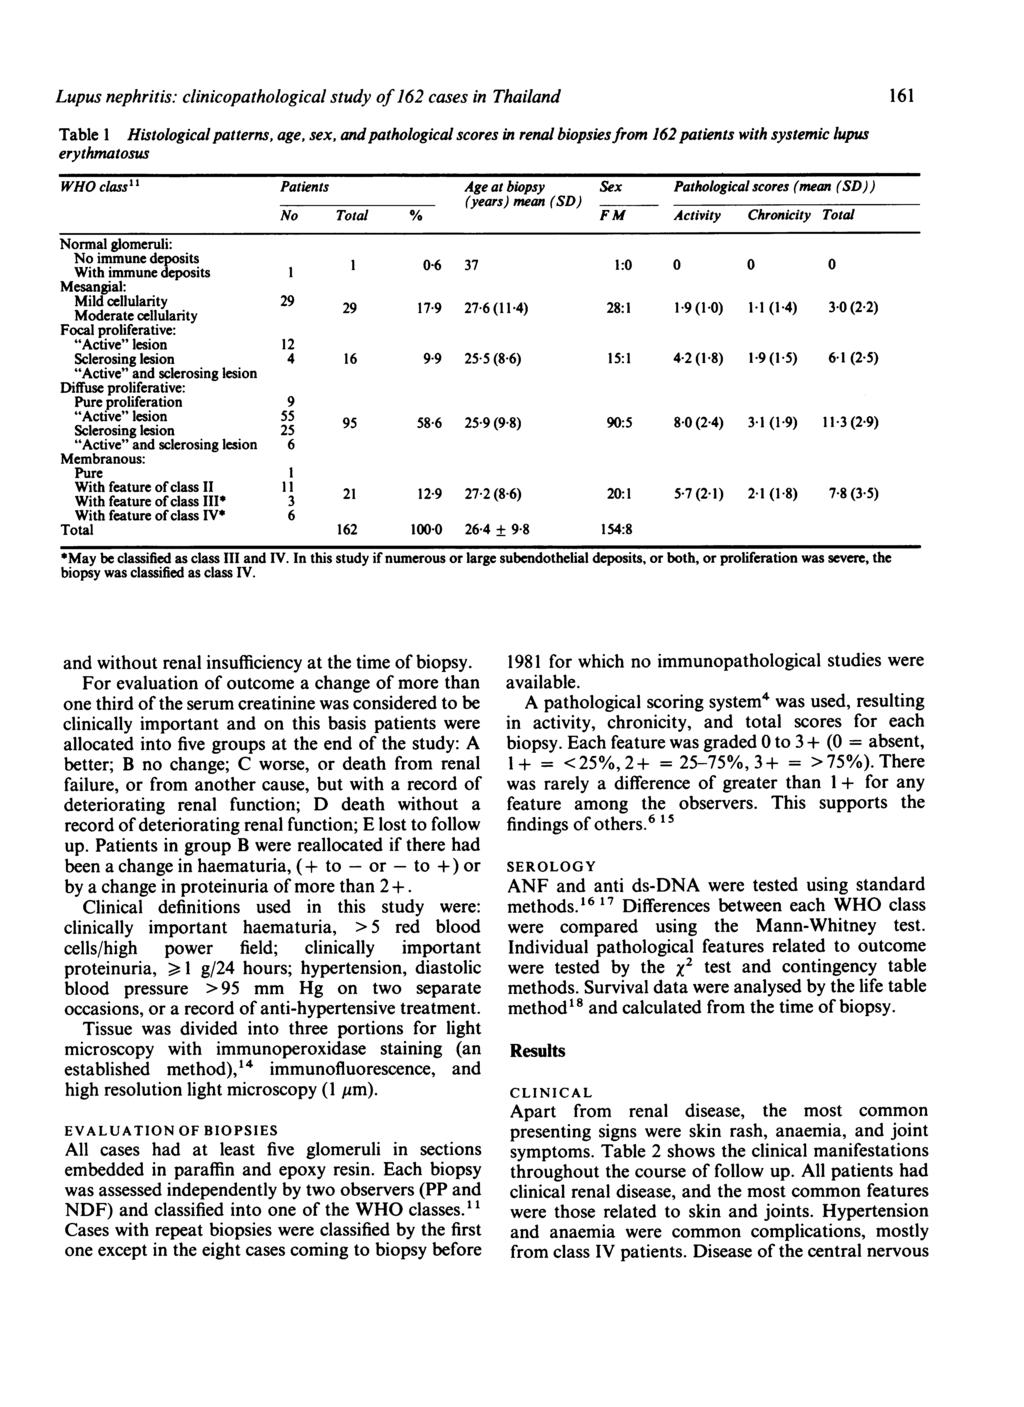 Lupus nephritis: clinicopthologicl study of 162 cses in Thilnd Tble 1 Histologicl ptterns, ge, sex, ndpthologicl scores in renl biopsiesfrom 162 ptients with systemic lupus erythmtosus WHO clss11